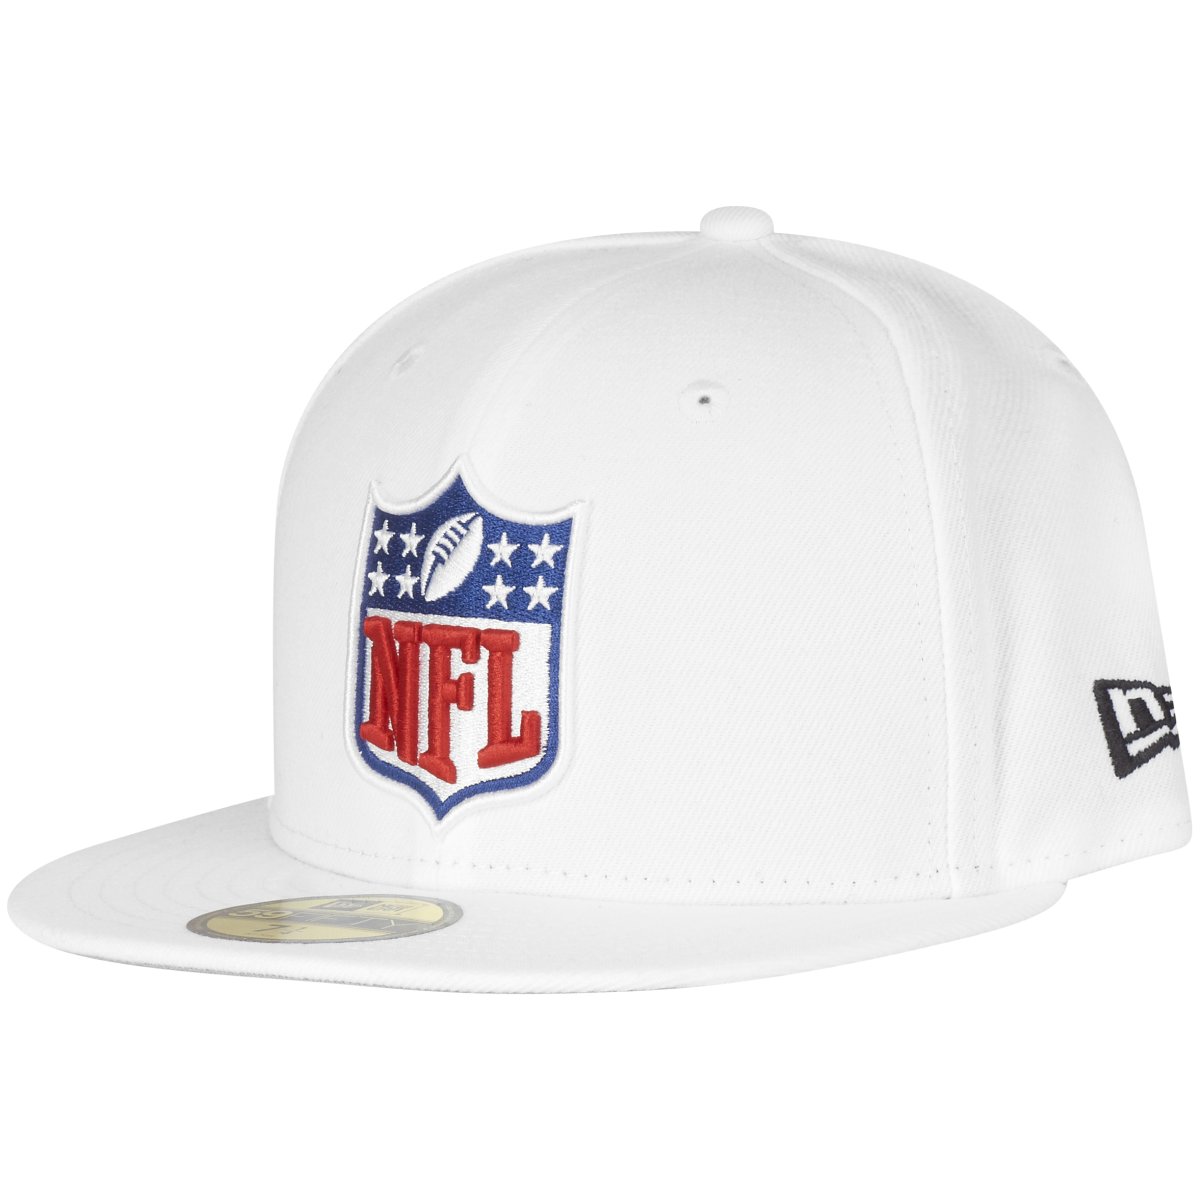 New Era 59Fifty Fitted Cap - NFL SHIELD Referee white | Fitted | Caps ...